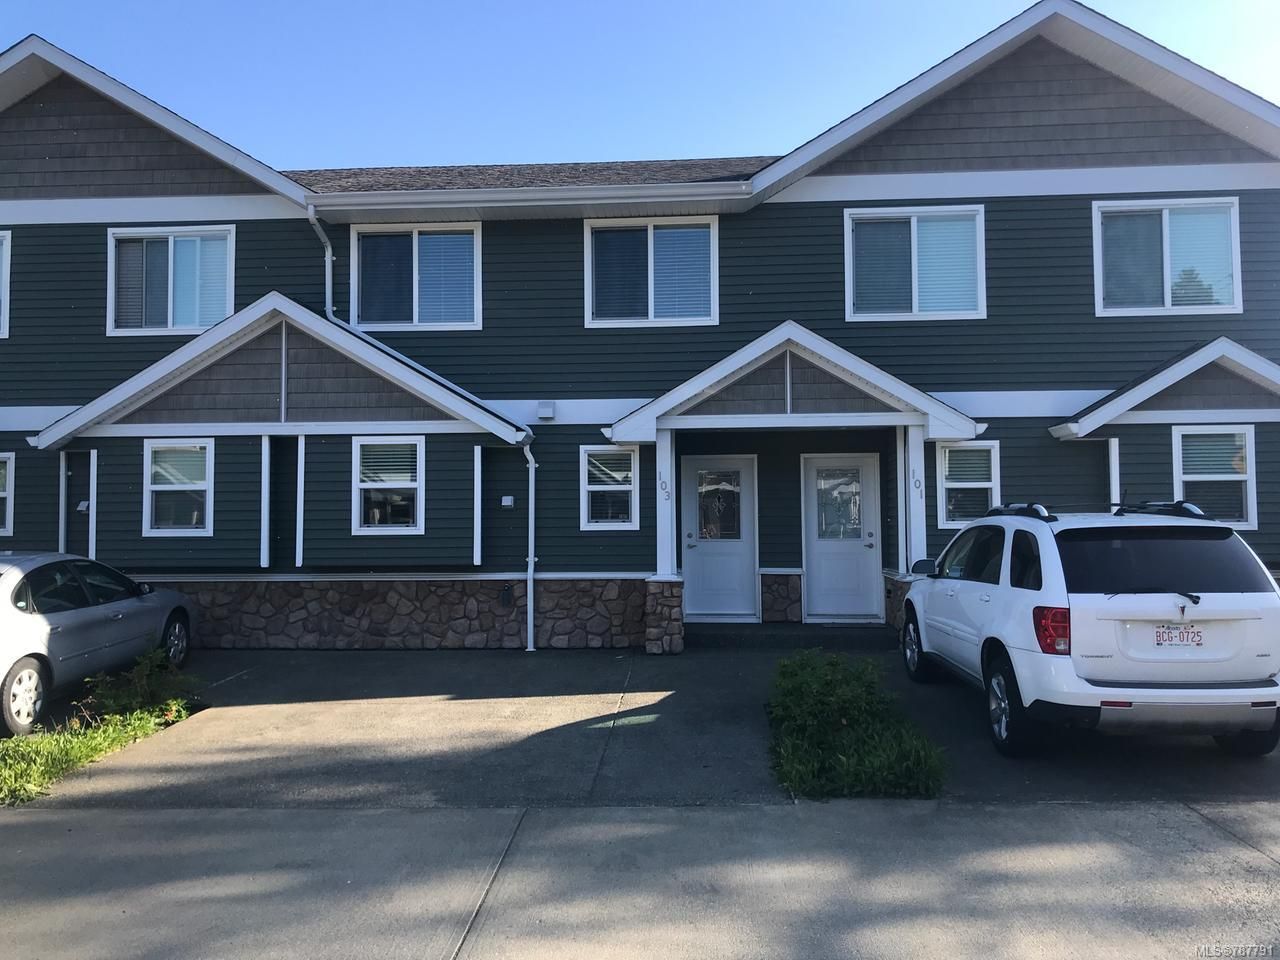 Main Photo: 103 170 CENTENNIAL DRIVE in COURTENAY: CV Courtenay East Row/Townhouse for sale (Comox Valley)  : MLS®# 787791